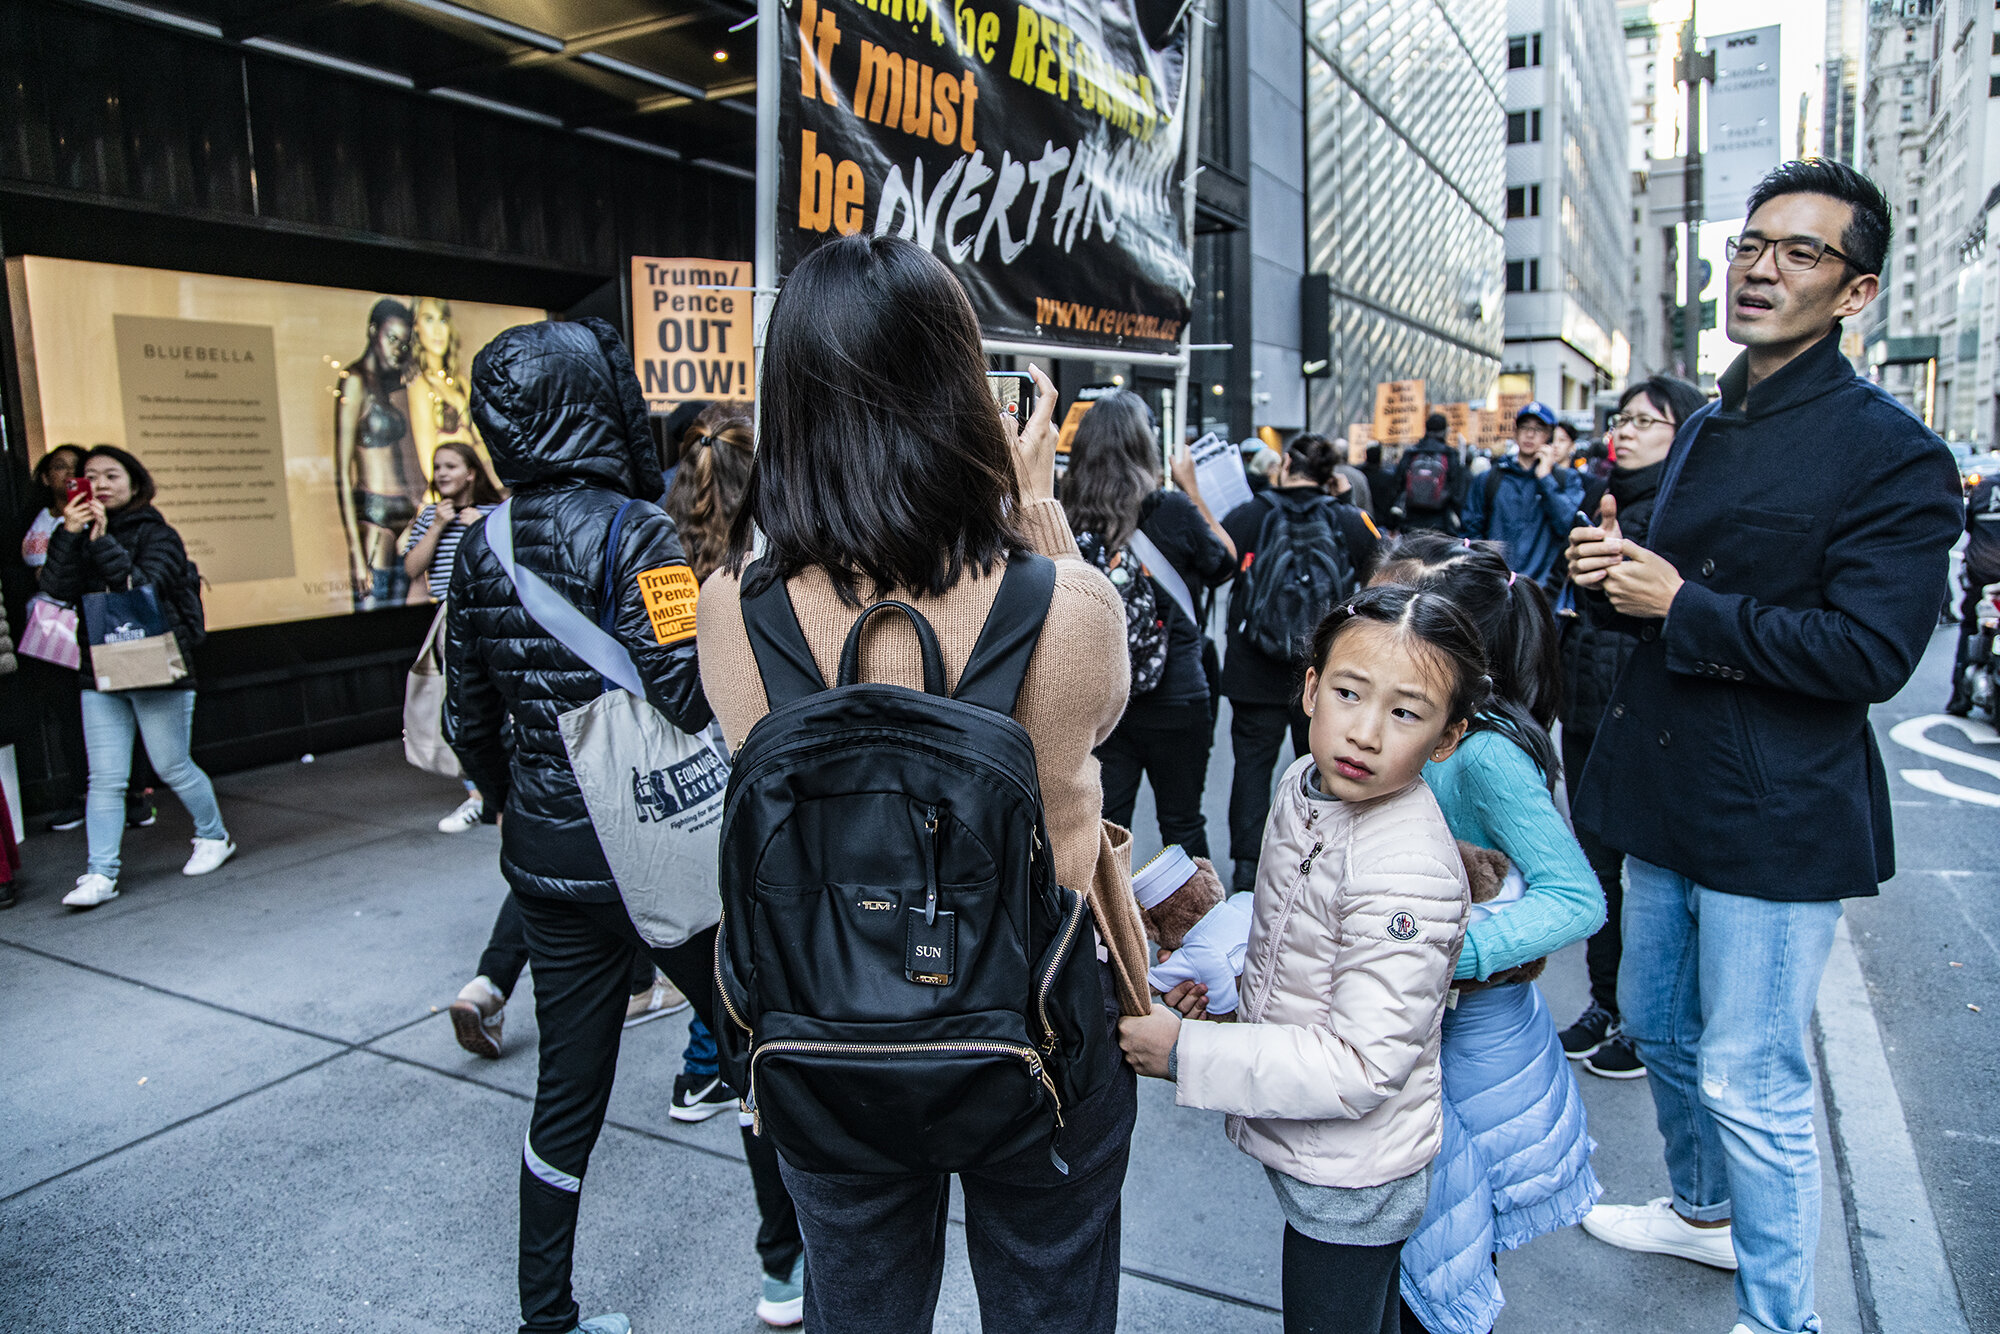 OUTNOW_Protest_2019_NYC-2499.jpg